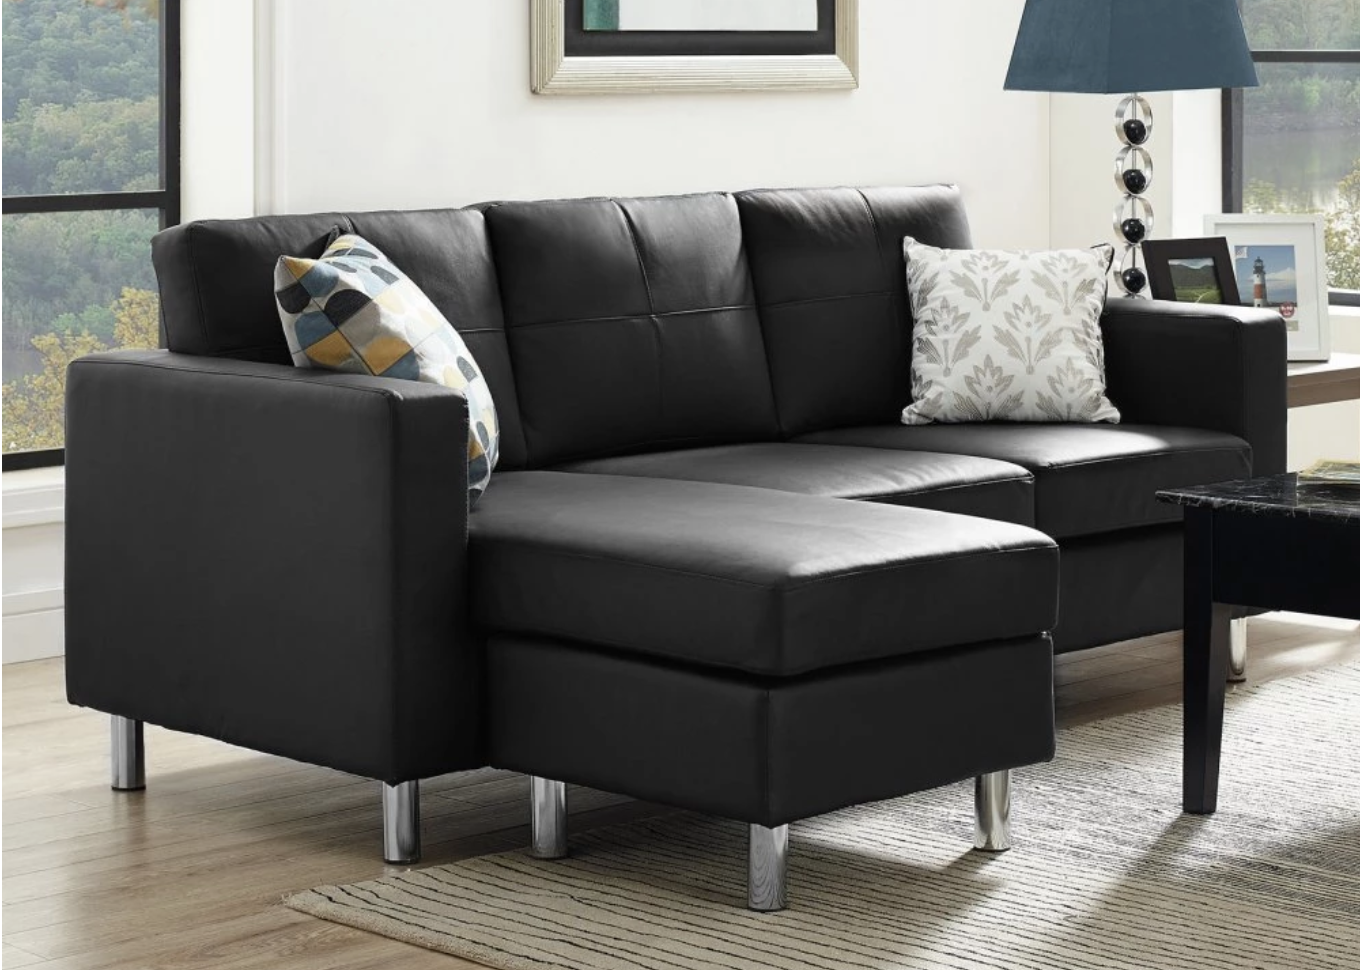 Space saving black sectional sofa for small spaces